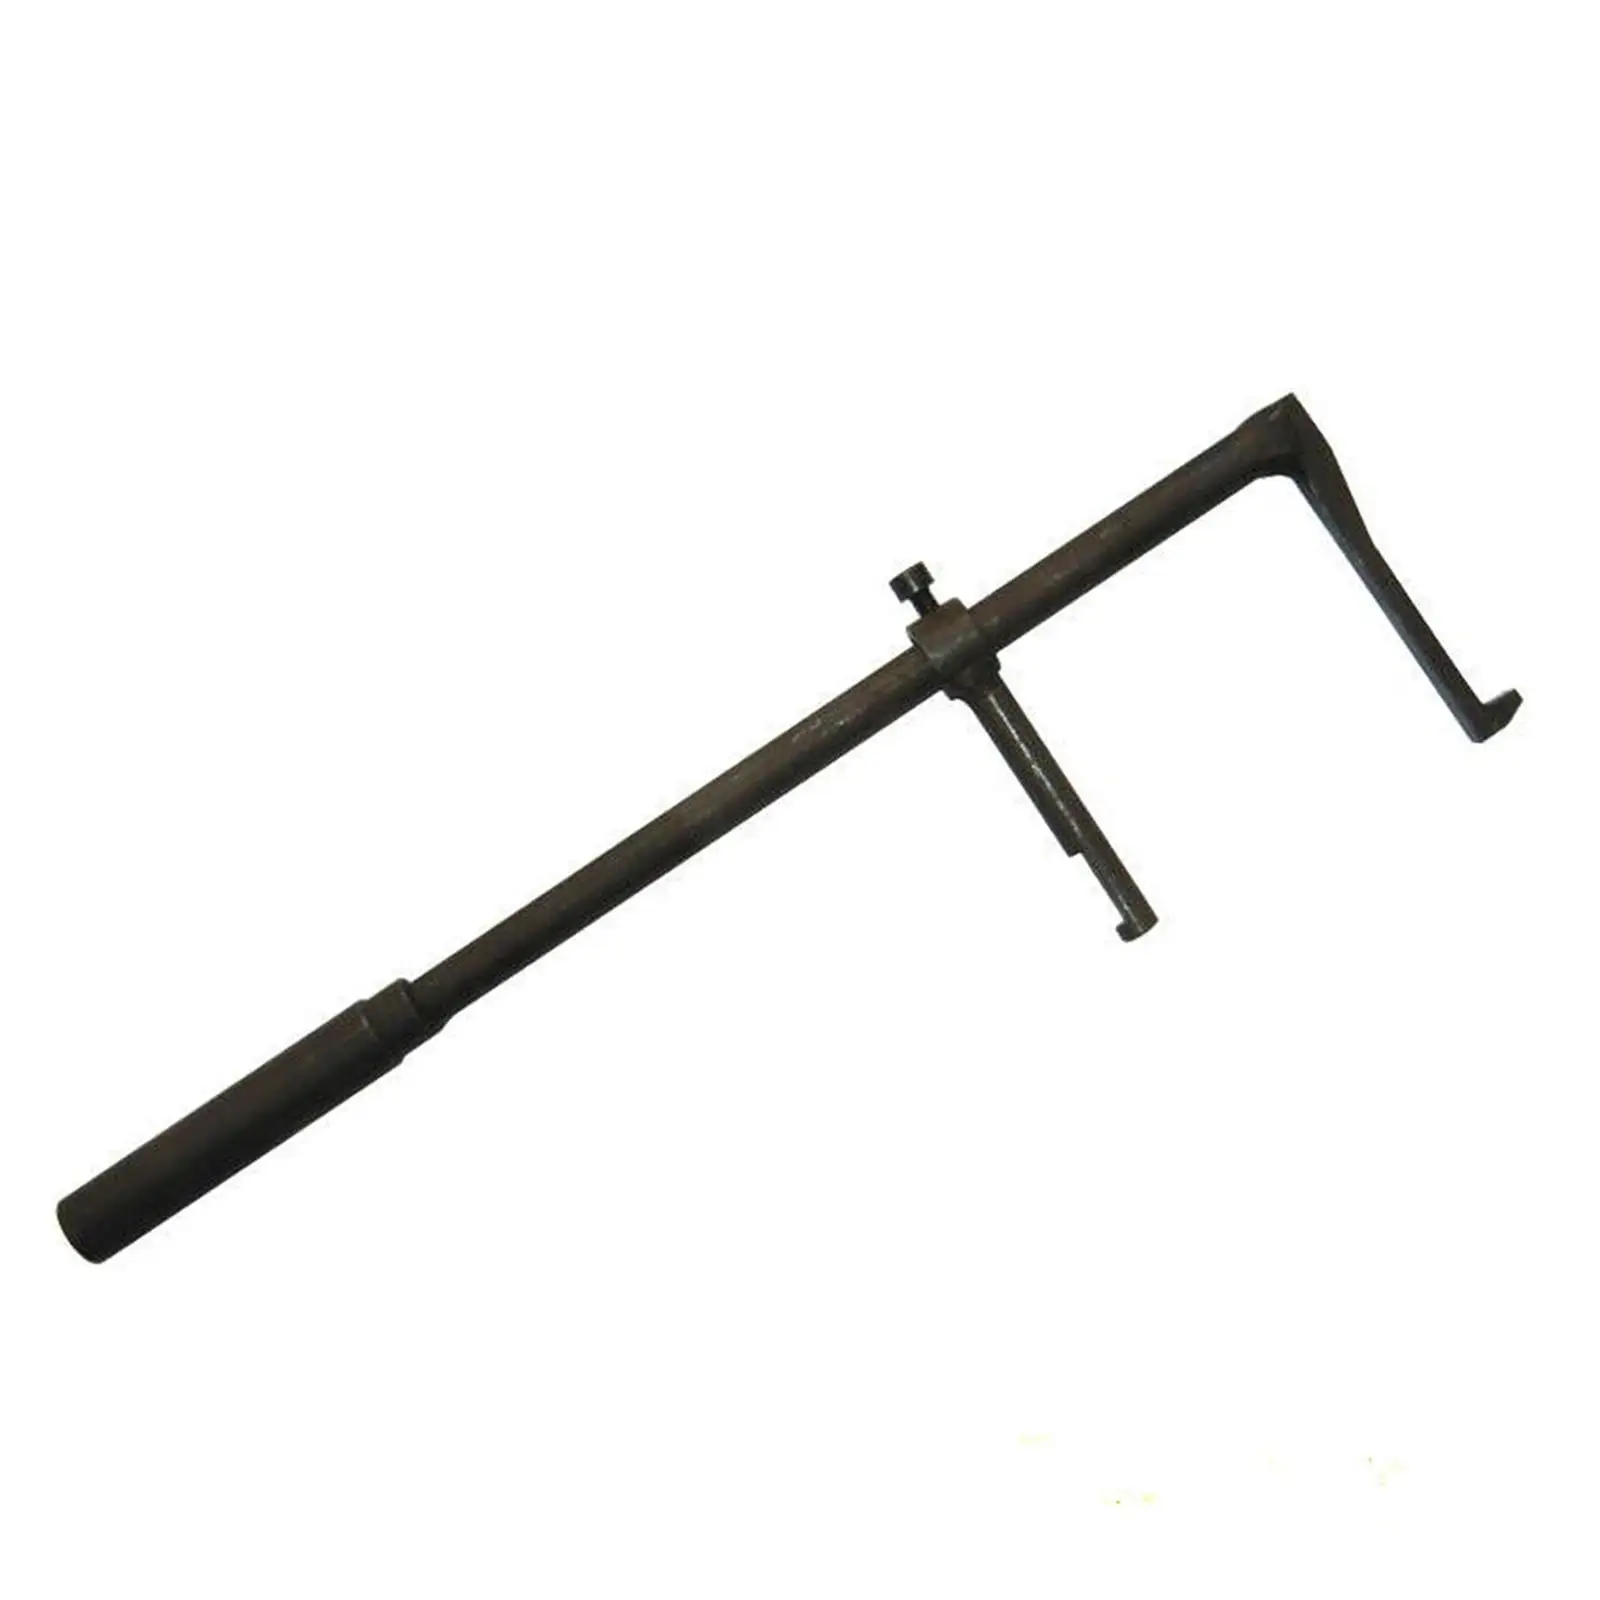 Front Fork Oil Seal Puller Remover, O Sealing Ring Puller Repair Tool, Install Tool for Motorcycle